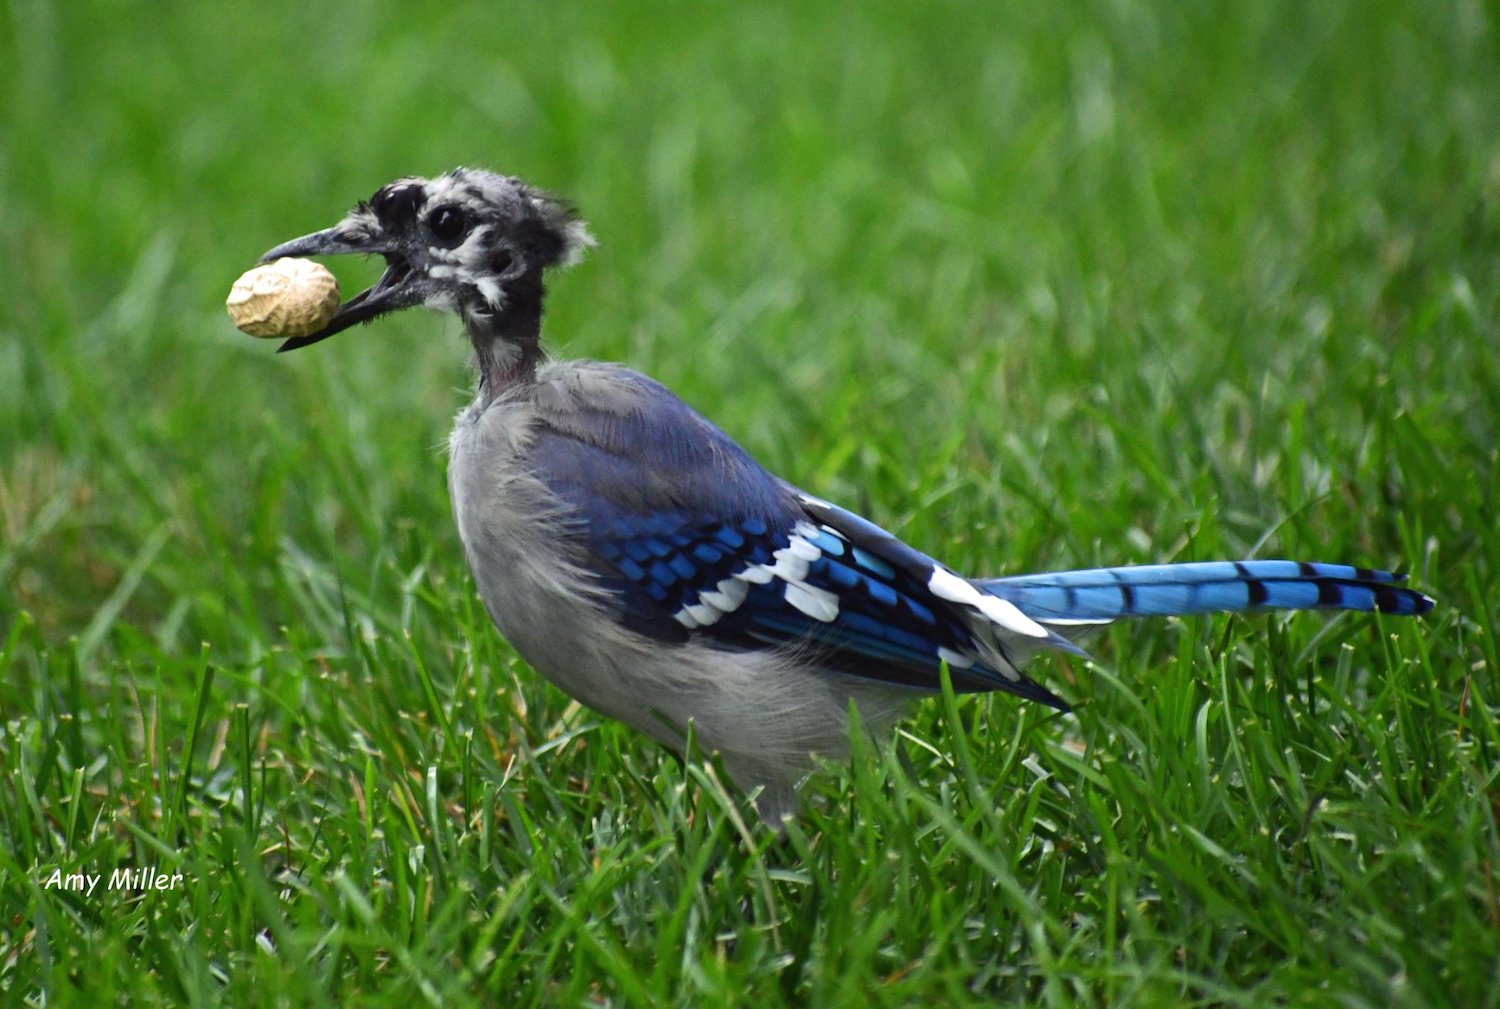 A blue jay in the grass with a peanut in its mouth.